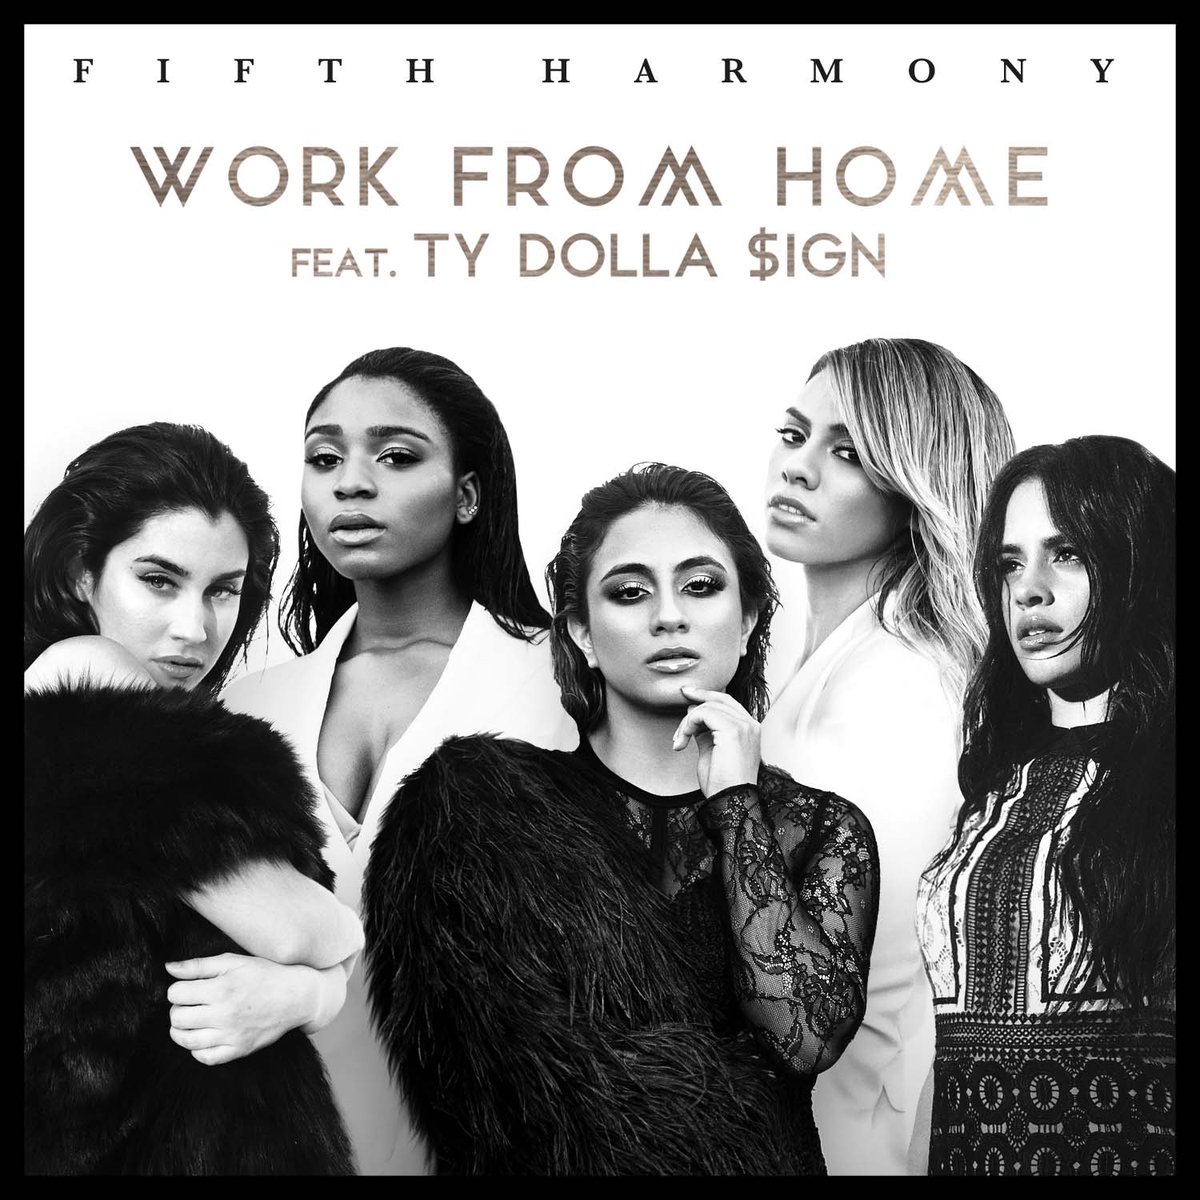 fifth harmony better together album download free